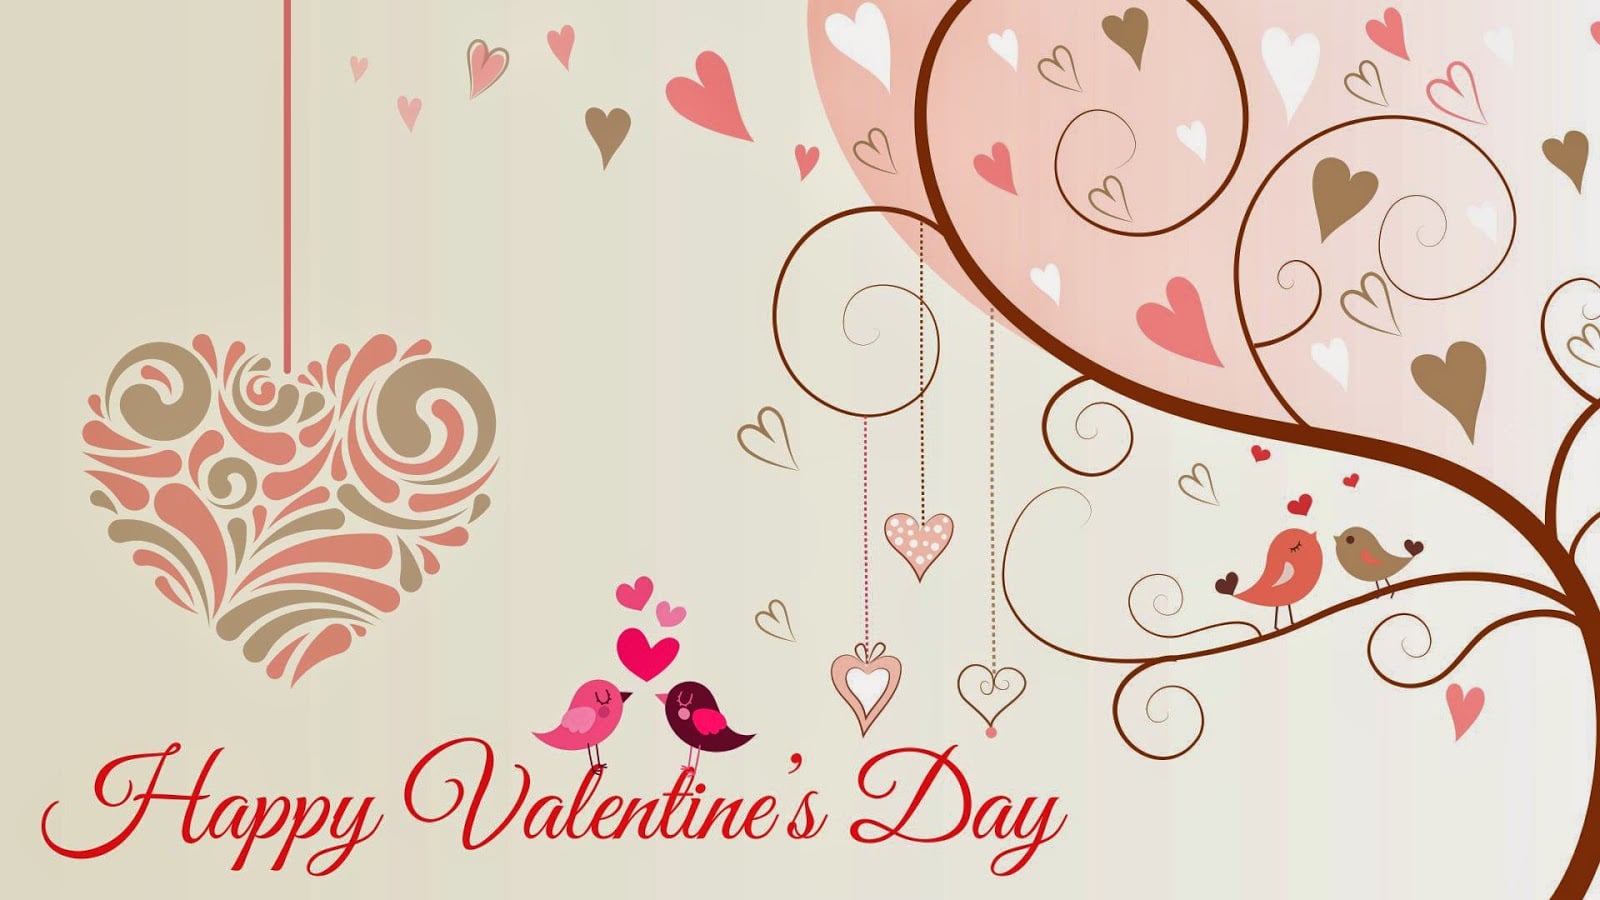 Happy Valentines Day Images, Pictures and Wallpapers (2021) Happy Valentine...